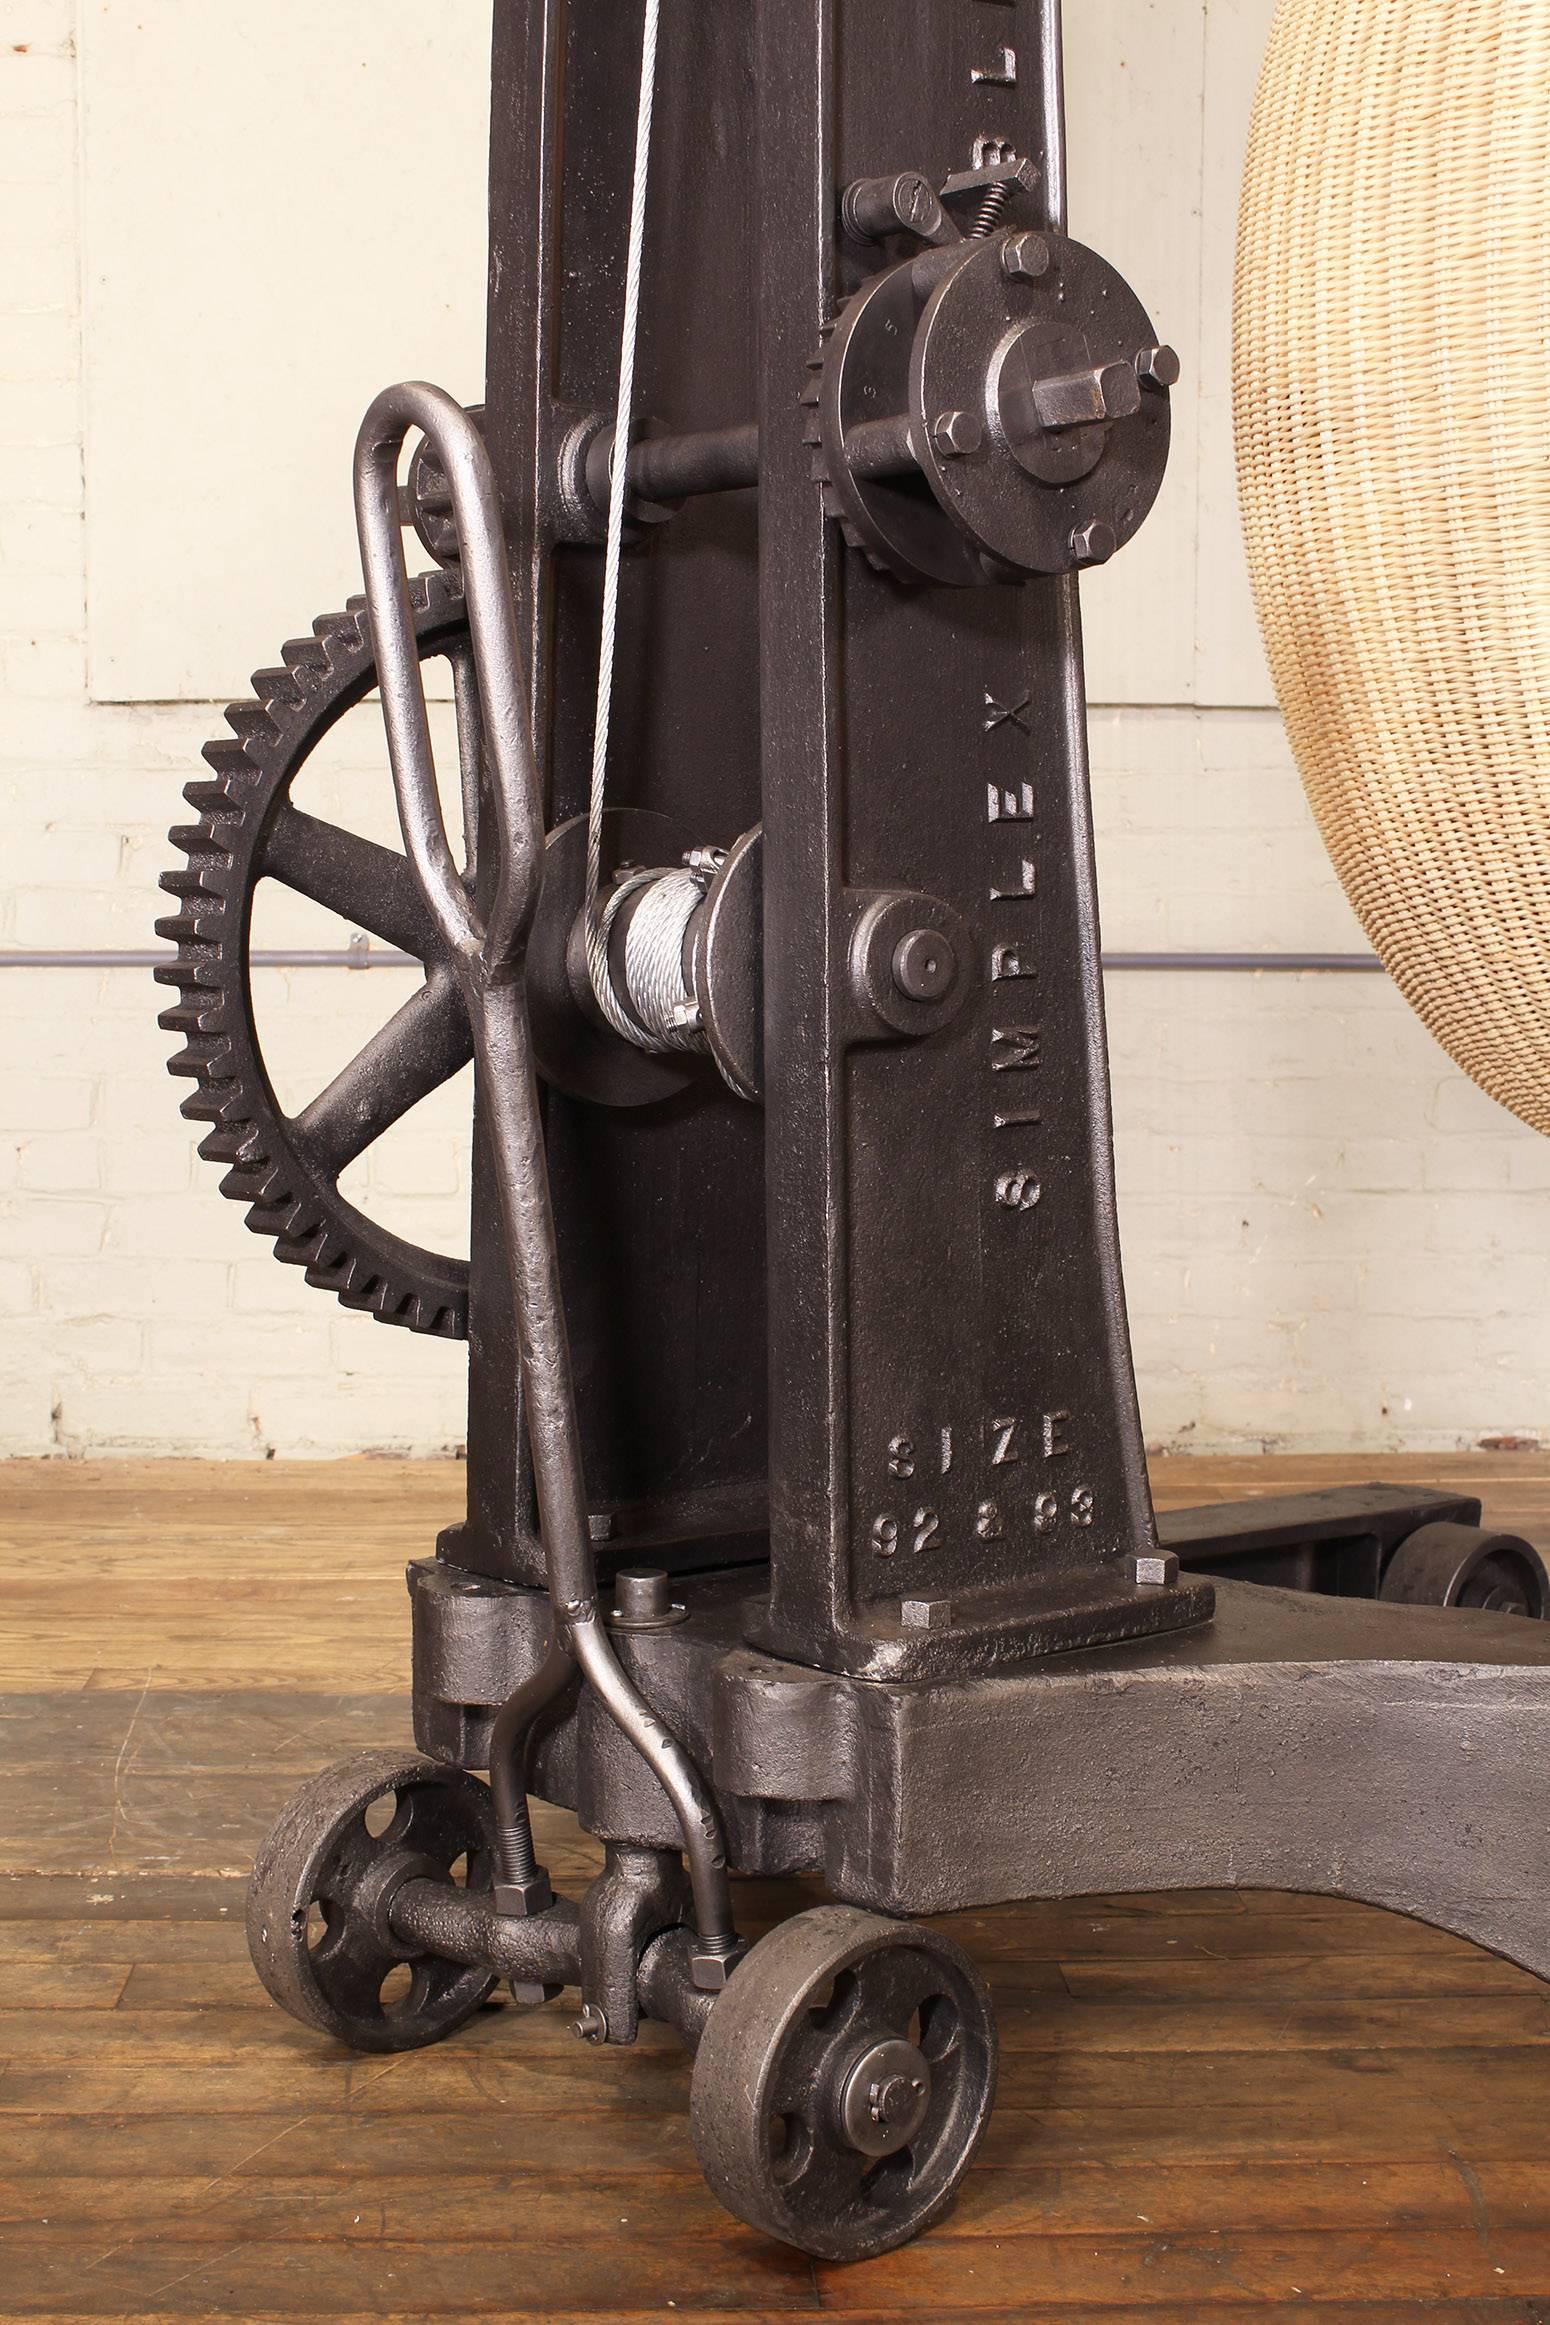 North American Hanging Egg Chair and 1920s Cast Iron Engine Hoist